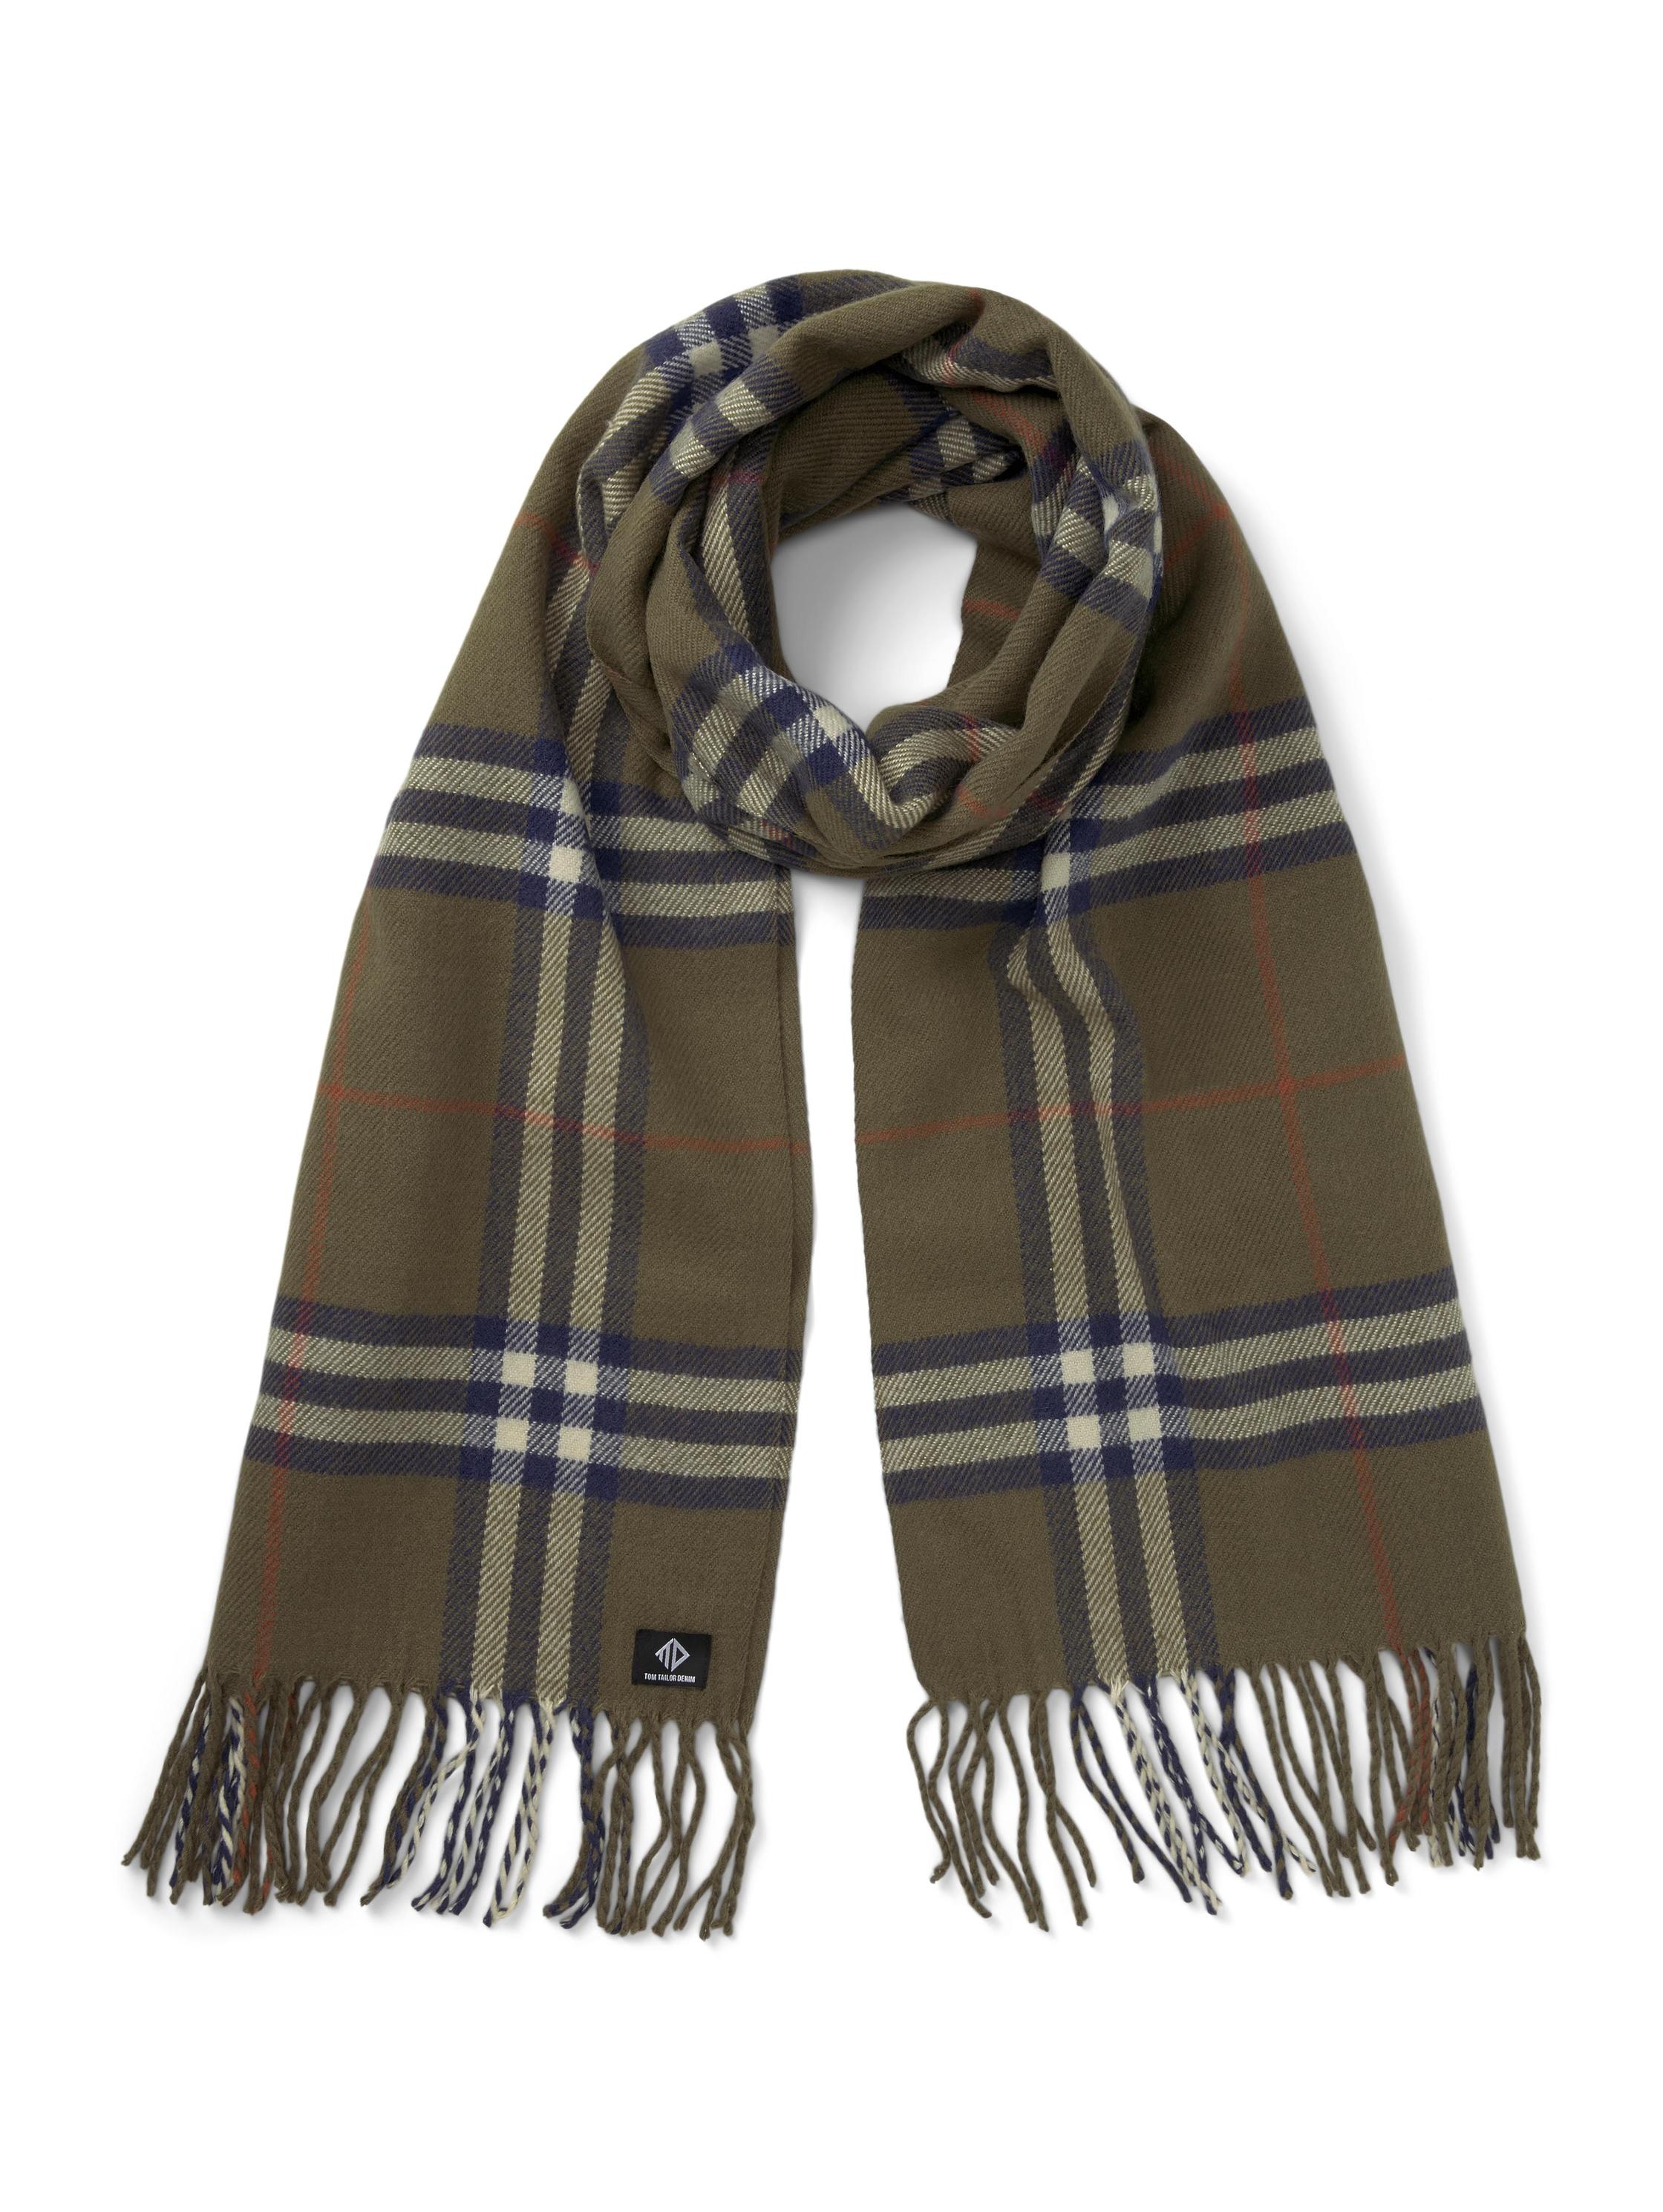 woven scarf check, olive navy rust check